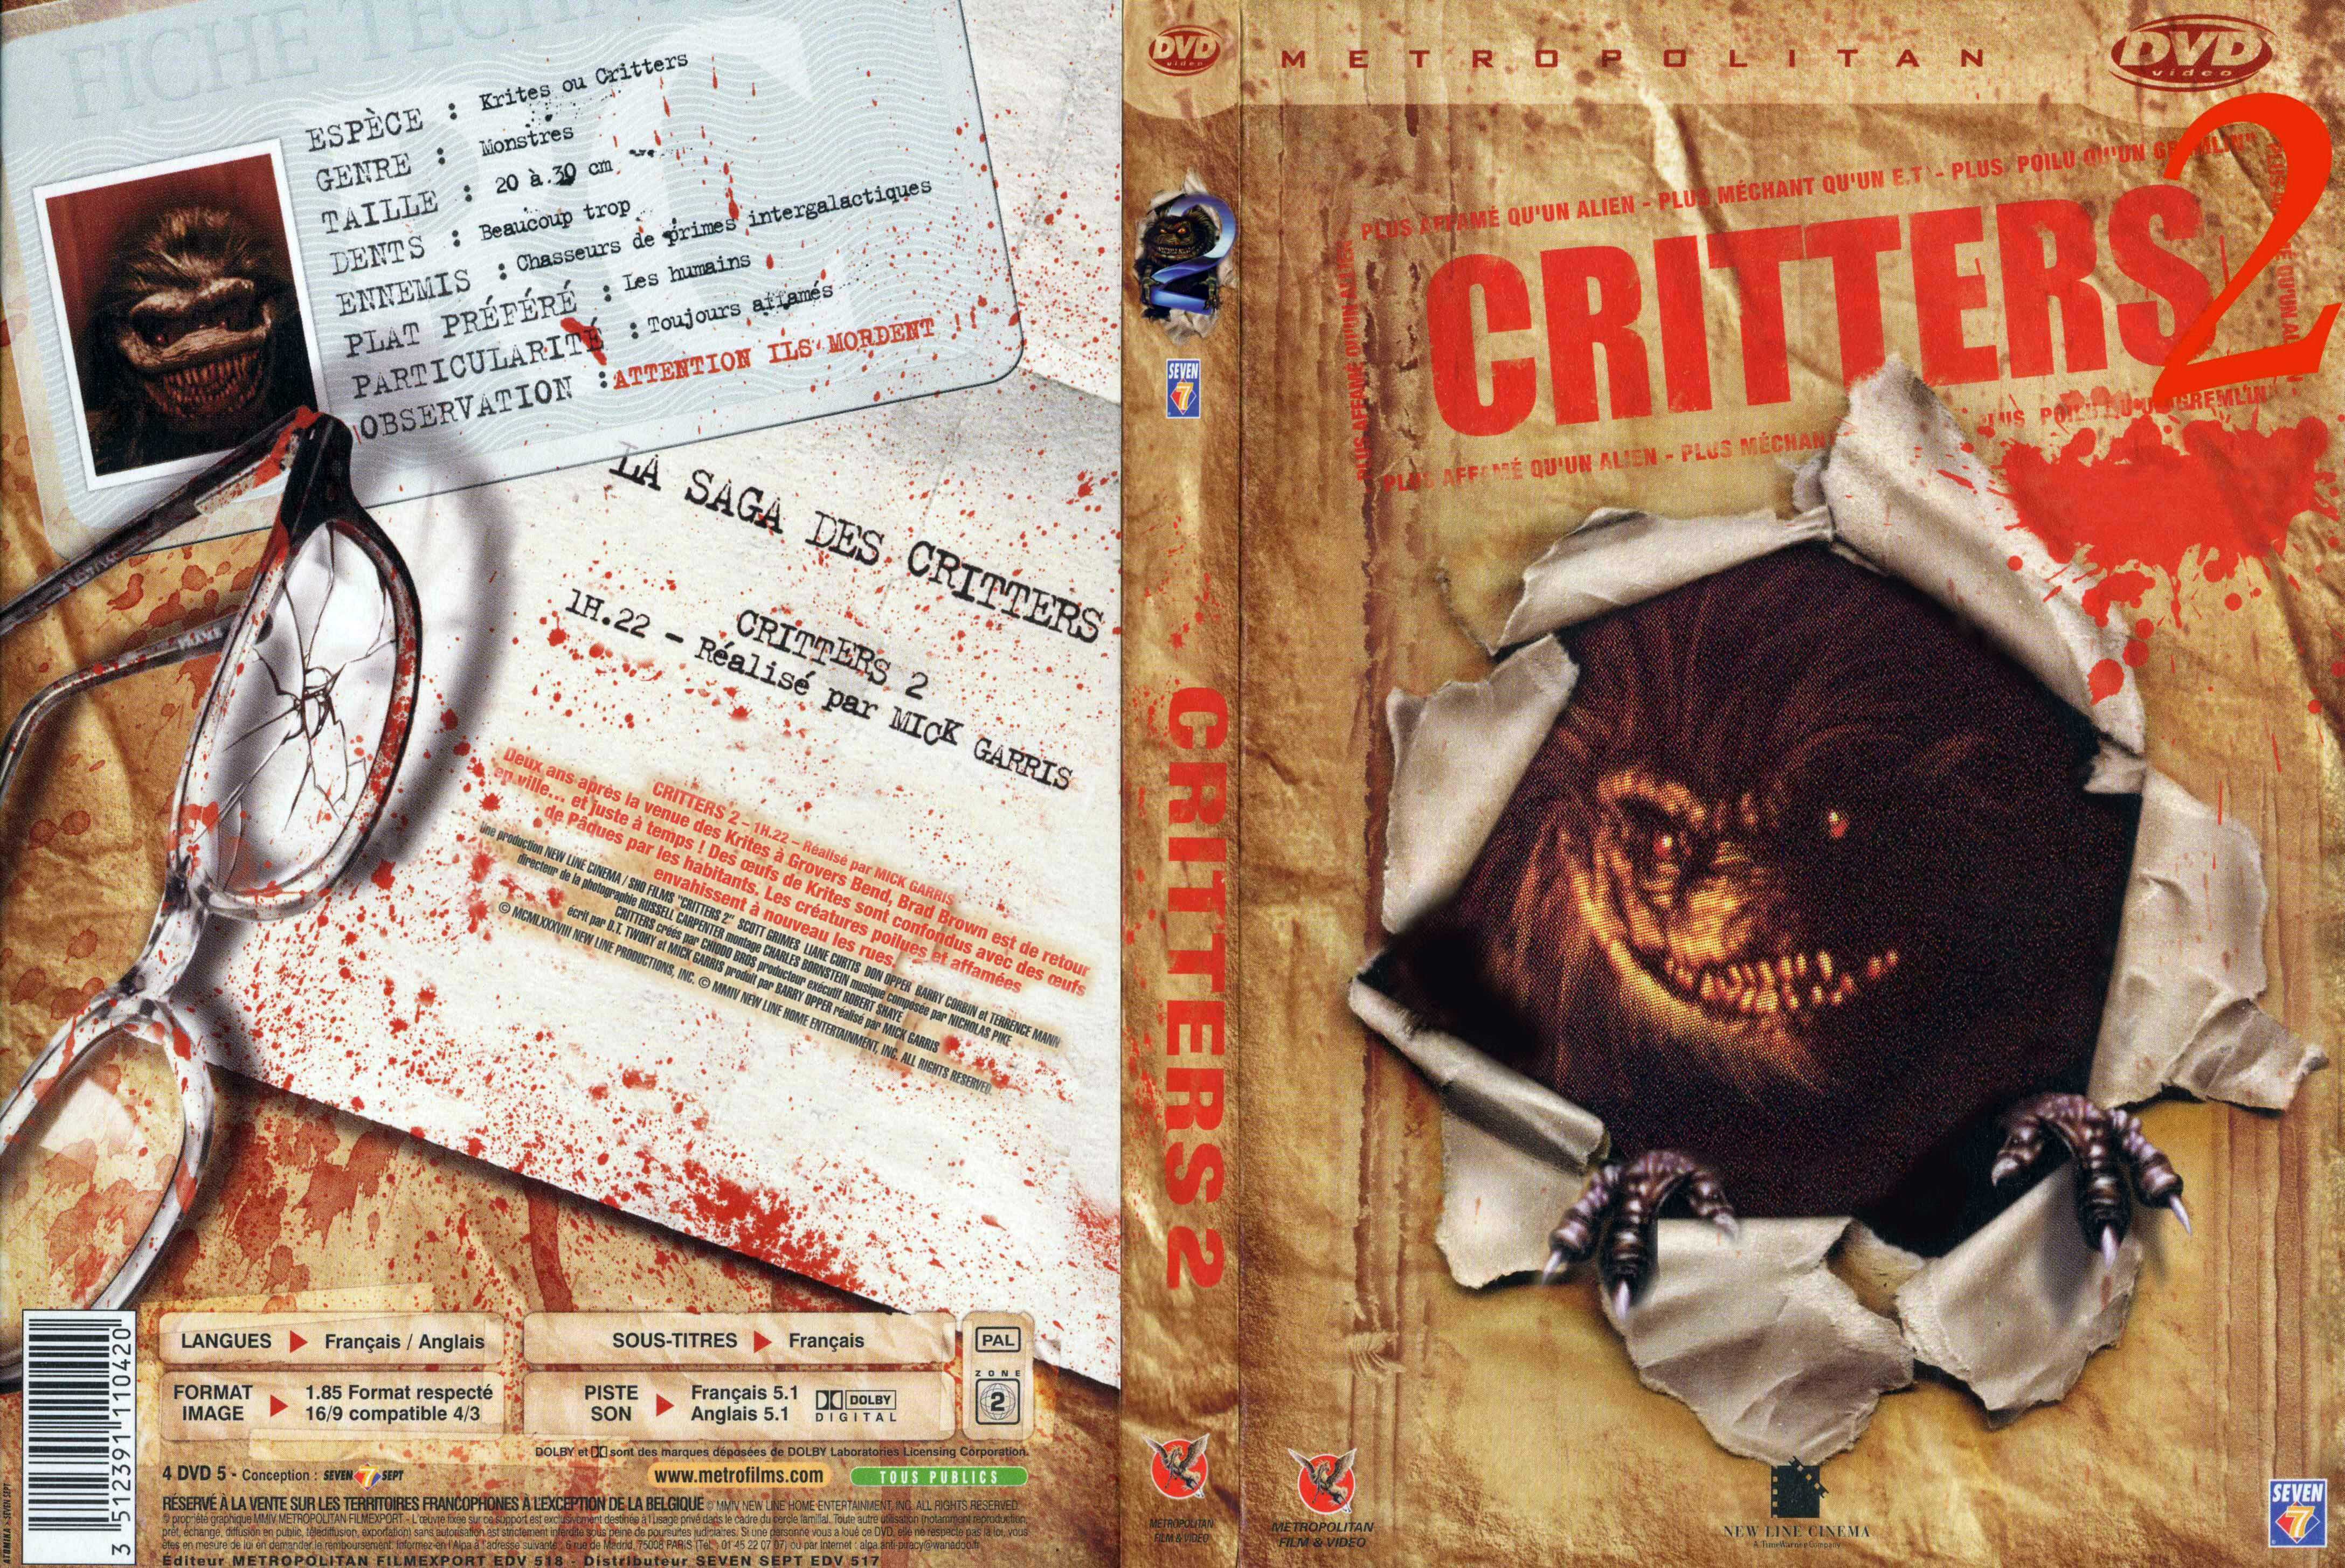 Jaquette DVD Critters 2